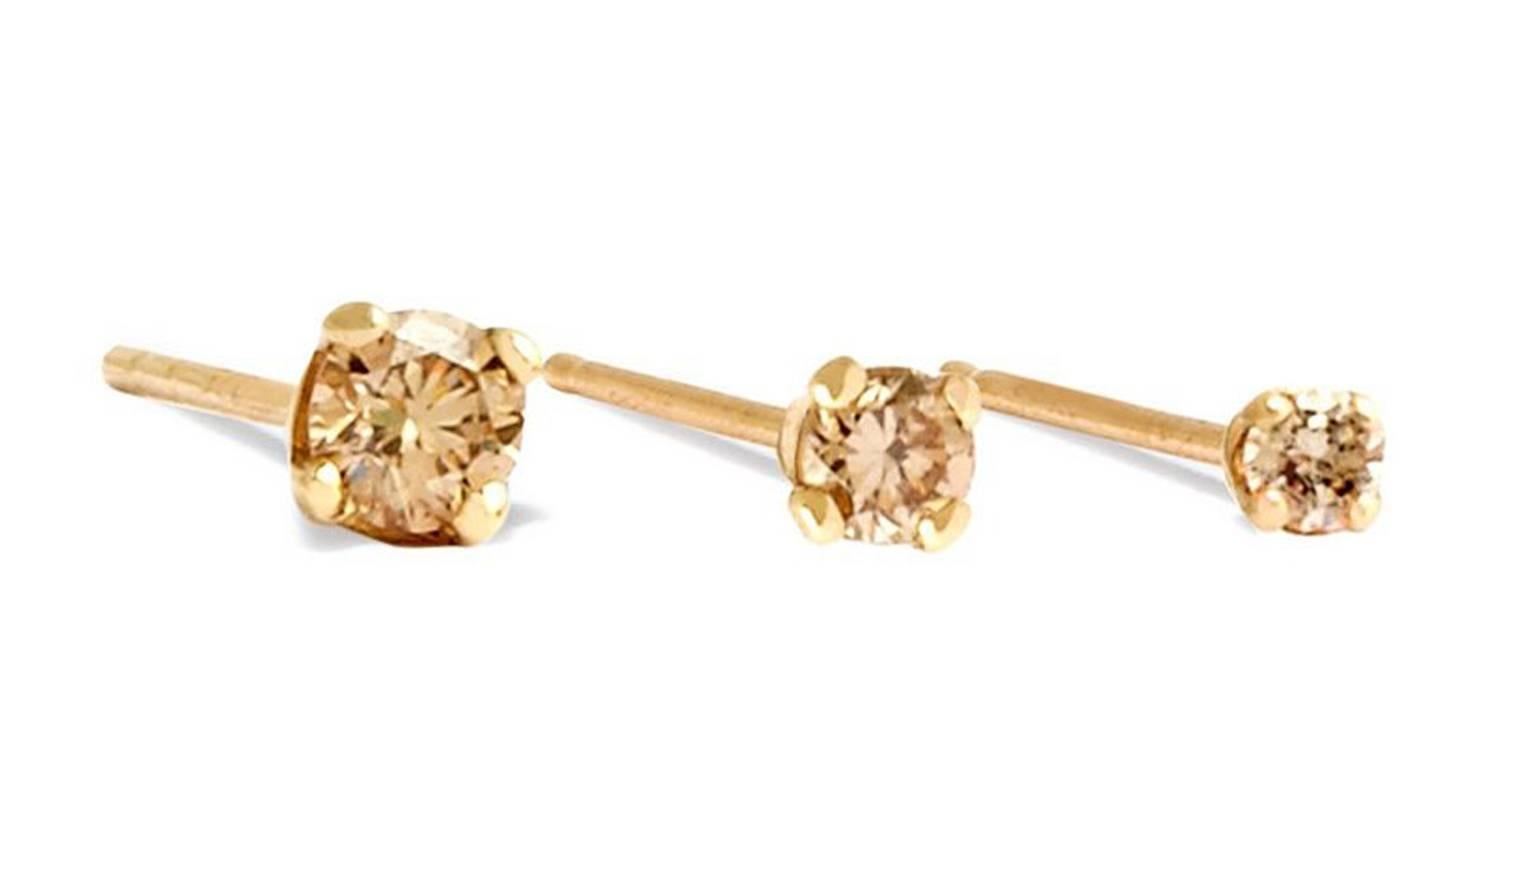 Sparkling champagne diamond stud earring set in 18-carat yellow gold.  Sold individually, each stud features a .05 carat round brilliant cut champagne diamond.  Measuring approximately 2.3 mm in diameter, this is the middle size of our range of